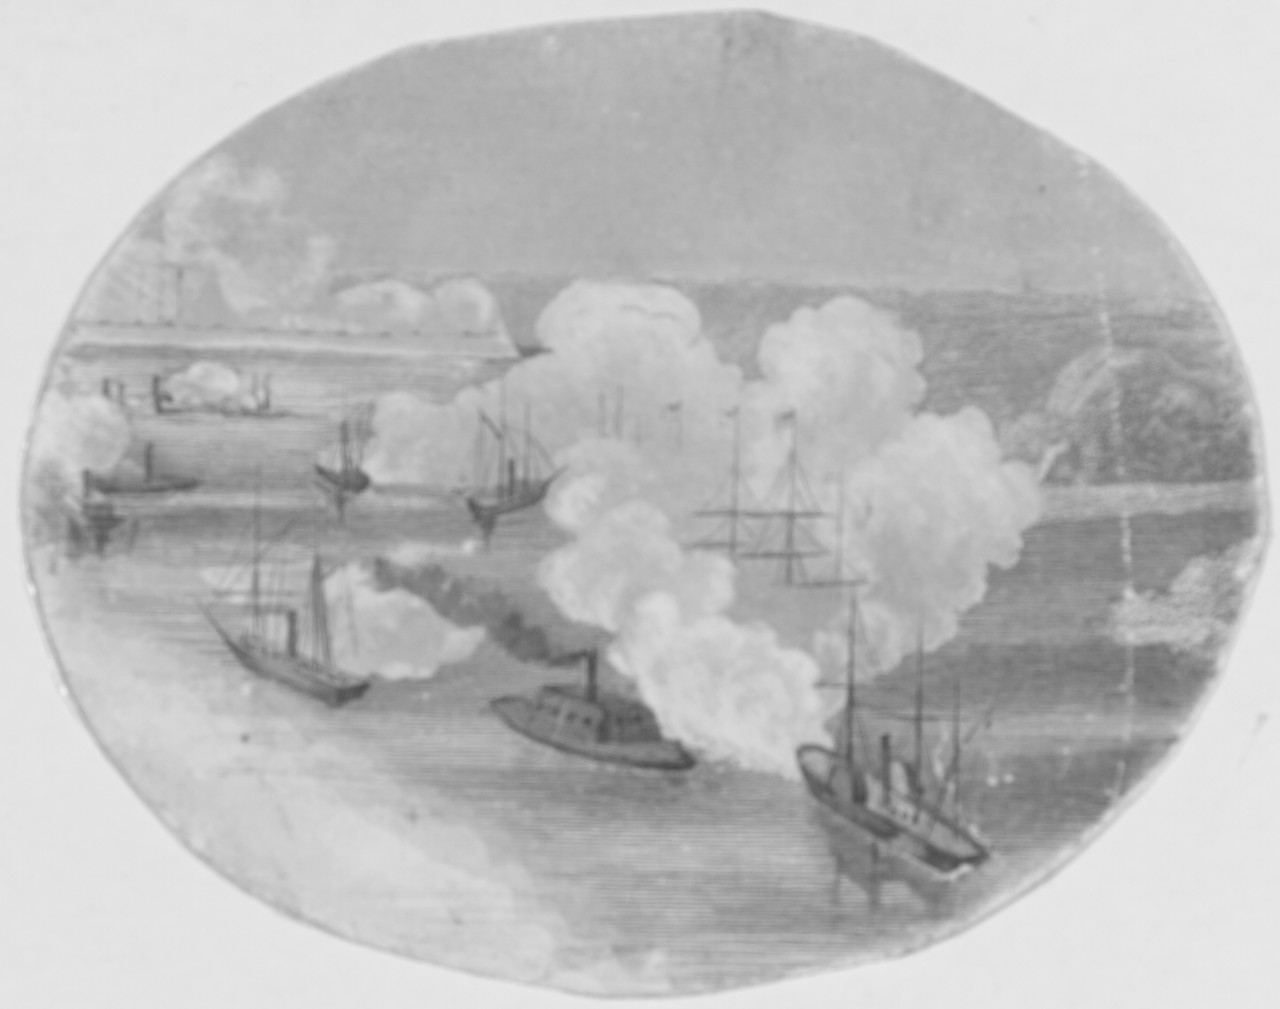 Photo #: NH 42242  Battle off Forts Jackson and St. Philip, 24 April 1862